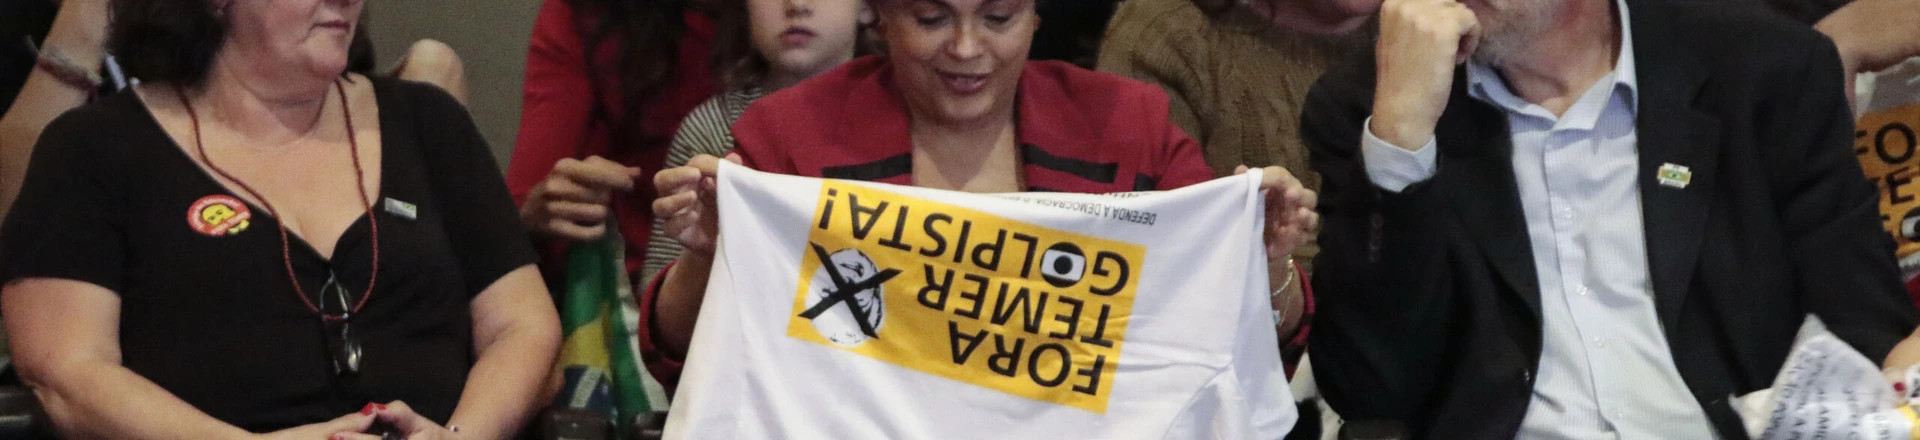 Brazilian suspended President Dilma Rousseff (C) holds a T-shirt reading "Temer out, pro-coup", referring to Brazilian acting President Michel Temer during a rally in Sao Paulo, Brazil on August 23, 2016.Brazil's suspended president Dilma Rousseff enters her final battle to win back power on Thursday, when senators open an impeachment trial expected to remove her from office for good. / AFP / Miguel Schincariol (Photo credit should read MIGUEL SCHINCARIOL/AFP/Getty Images)